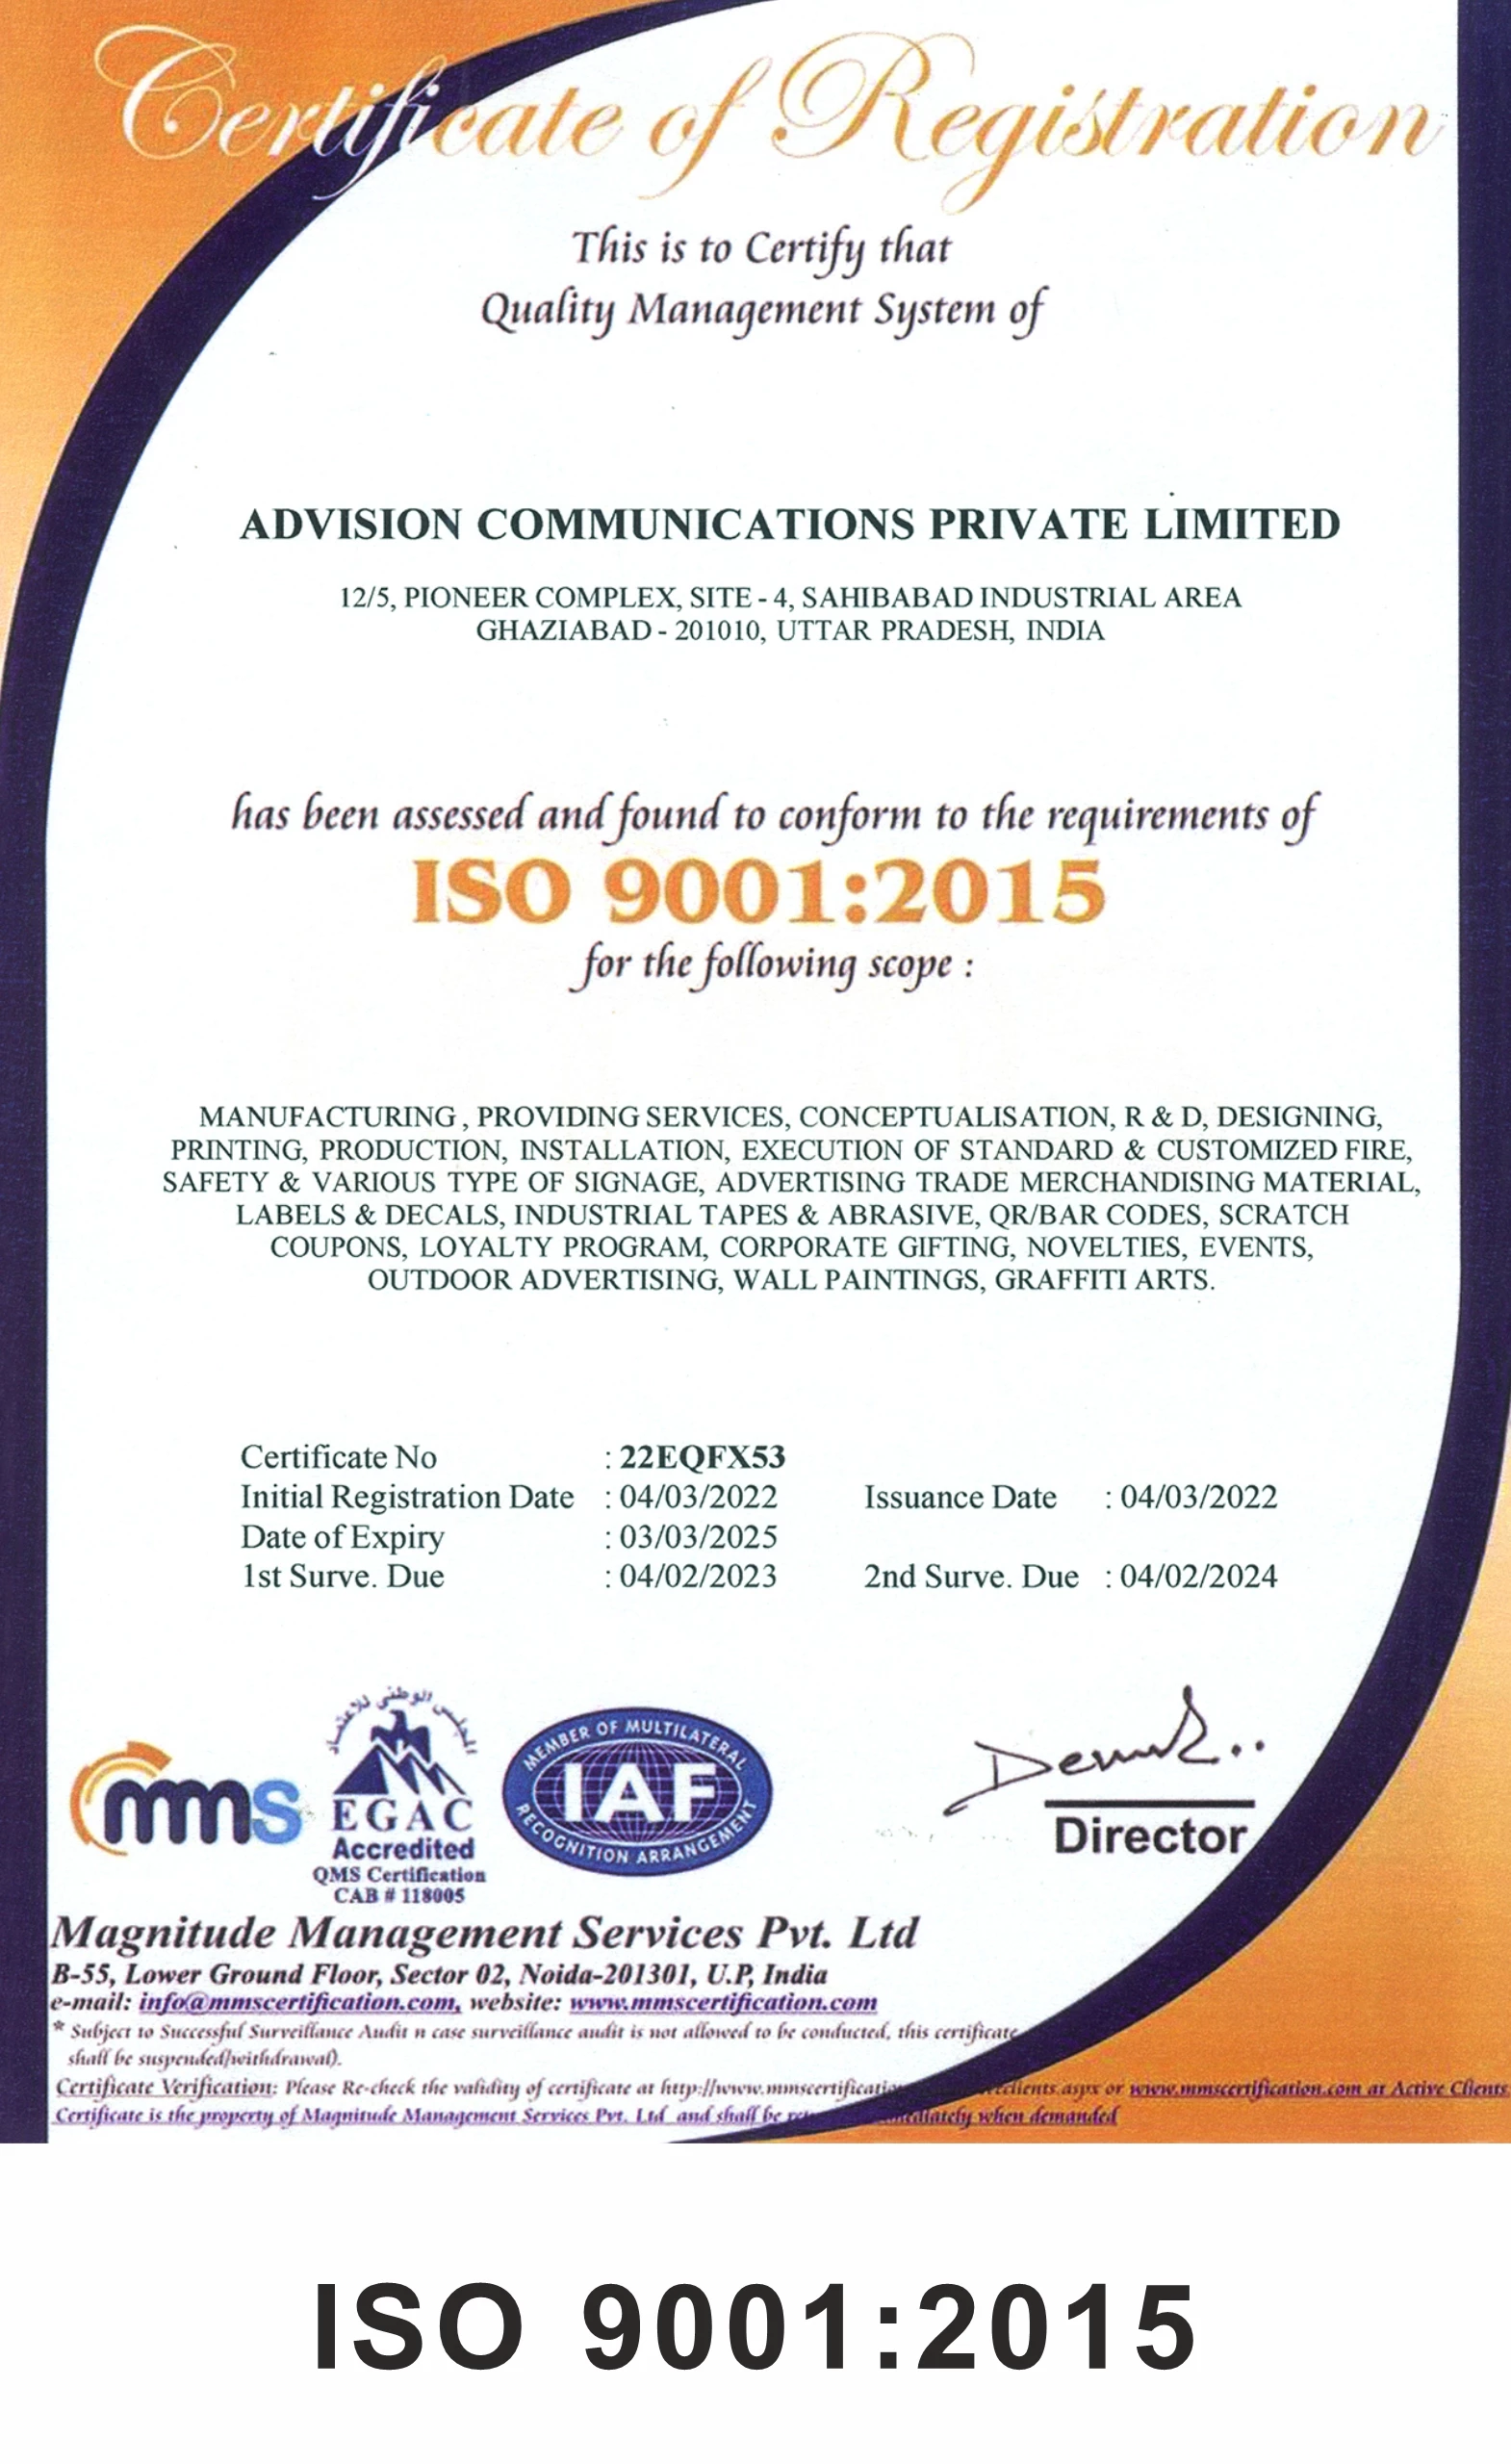 ISO 9001 x 2015 certificate